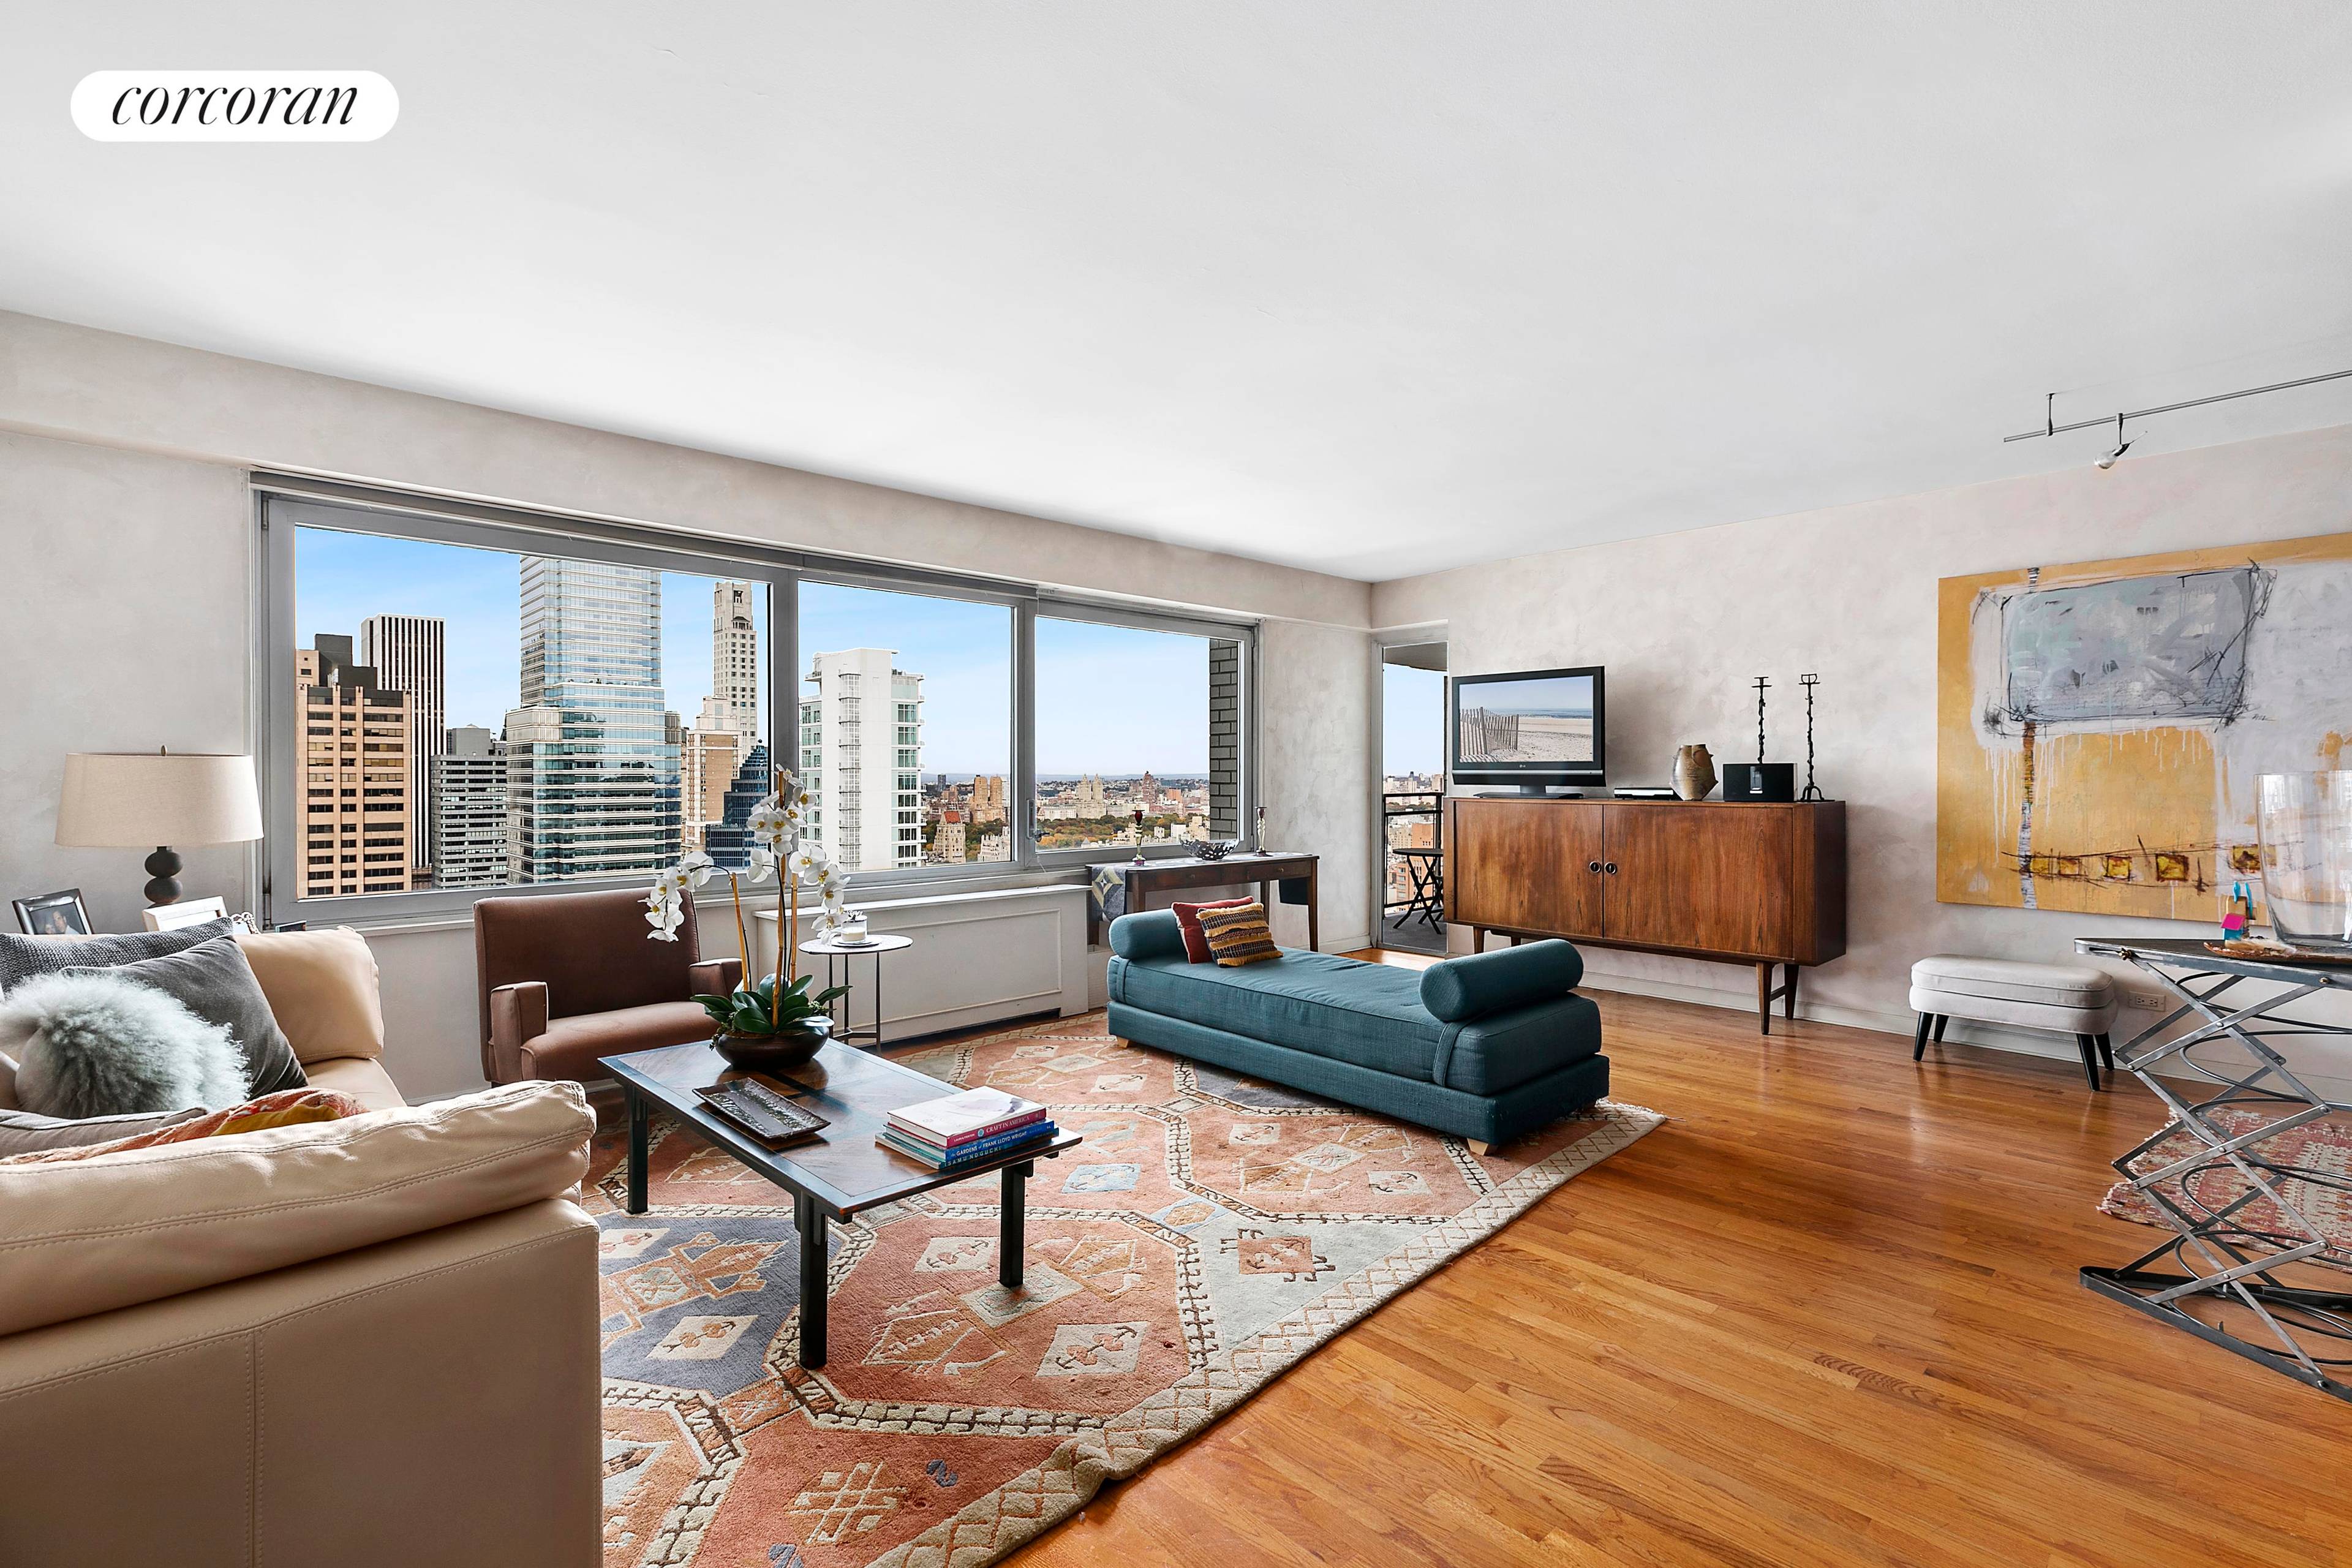 303 East 57 Street 42C, beautifully renovated 1 bed 1 1 2 bath apartment with spectacular open skyline and Central Park views.